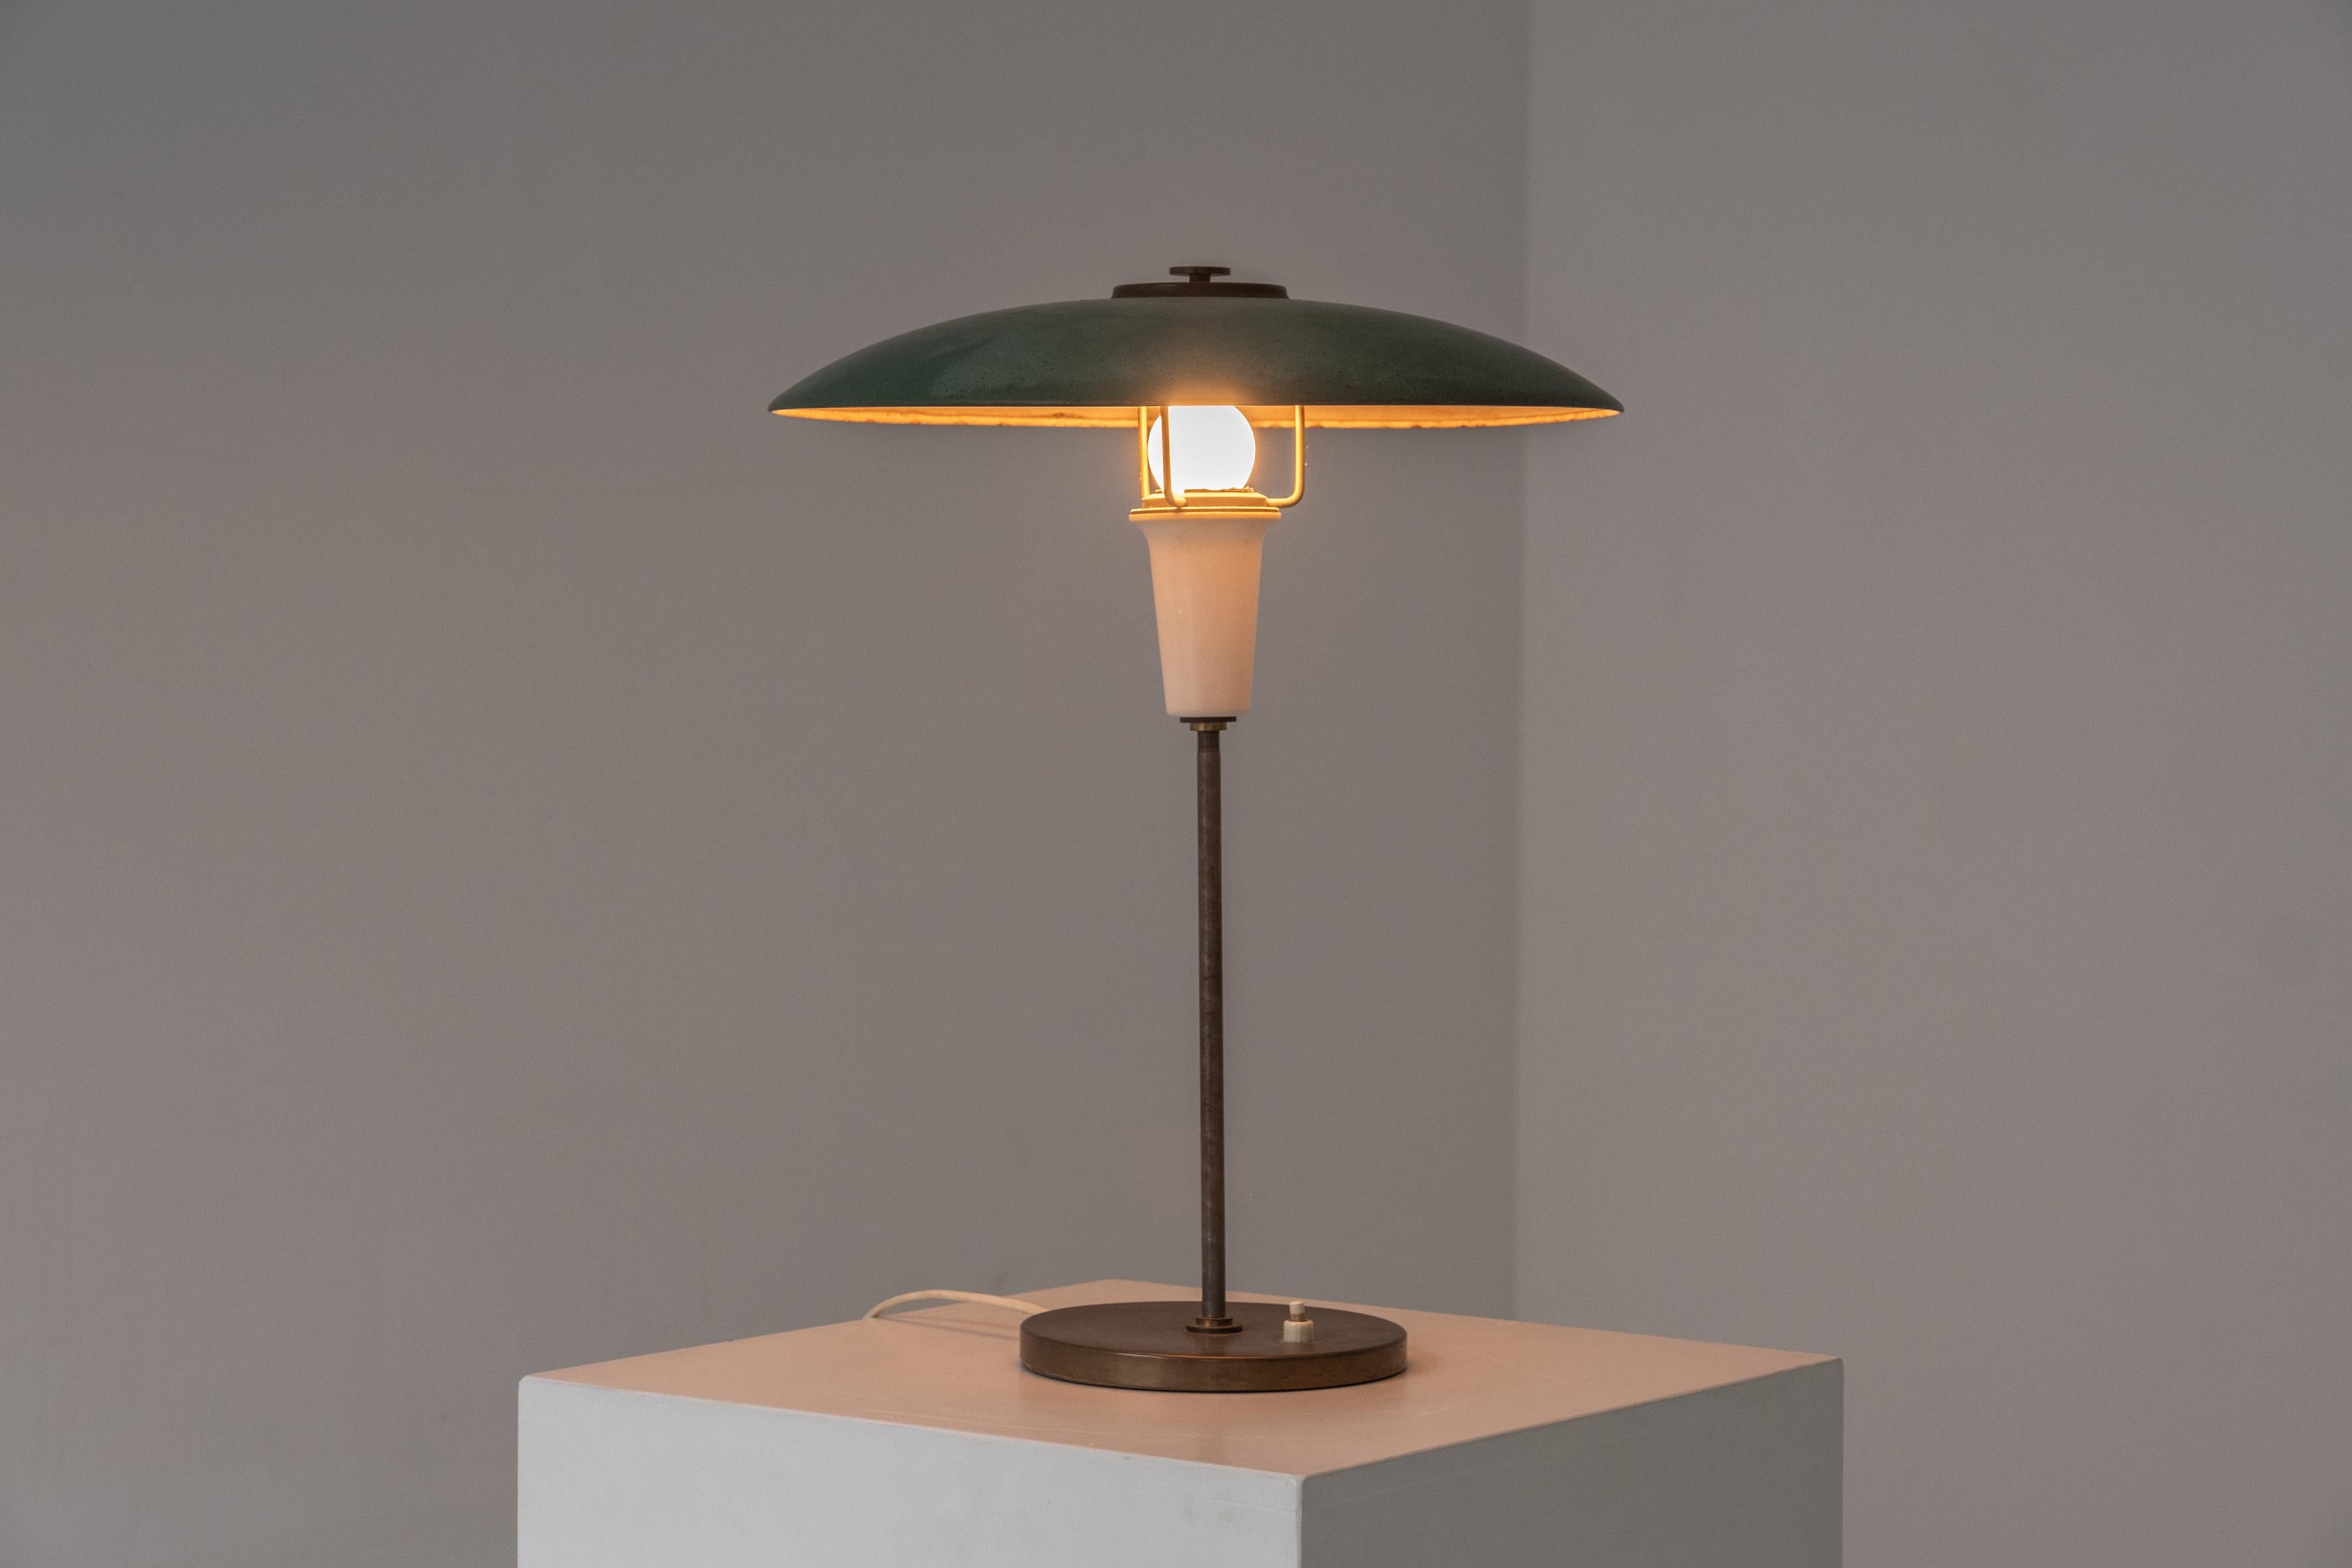 Scandinavian Modern Table lamp from Denmark, designed and manufactured during the 1960s. 